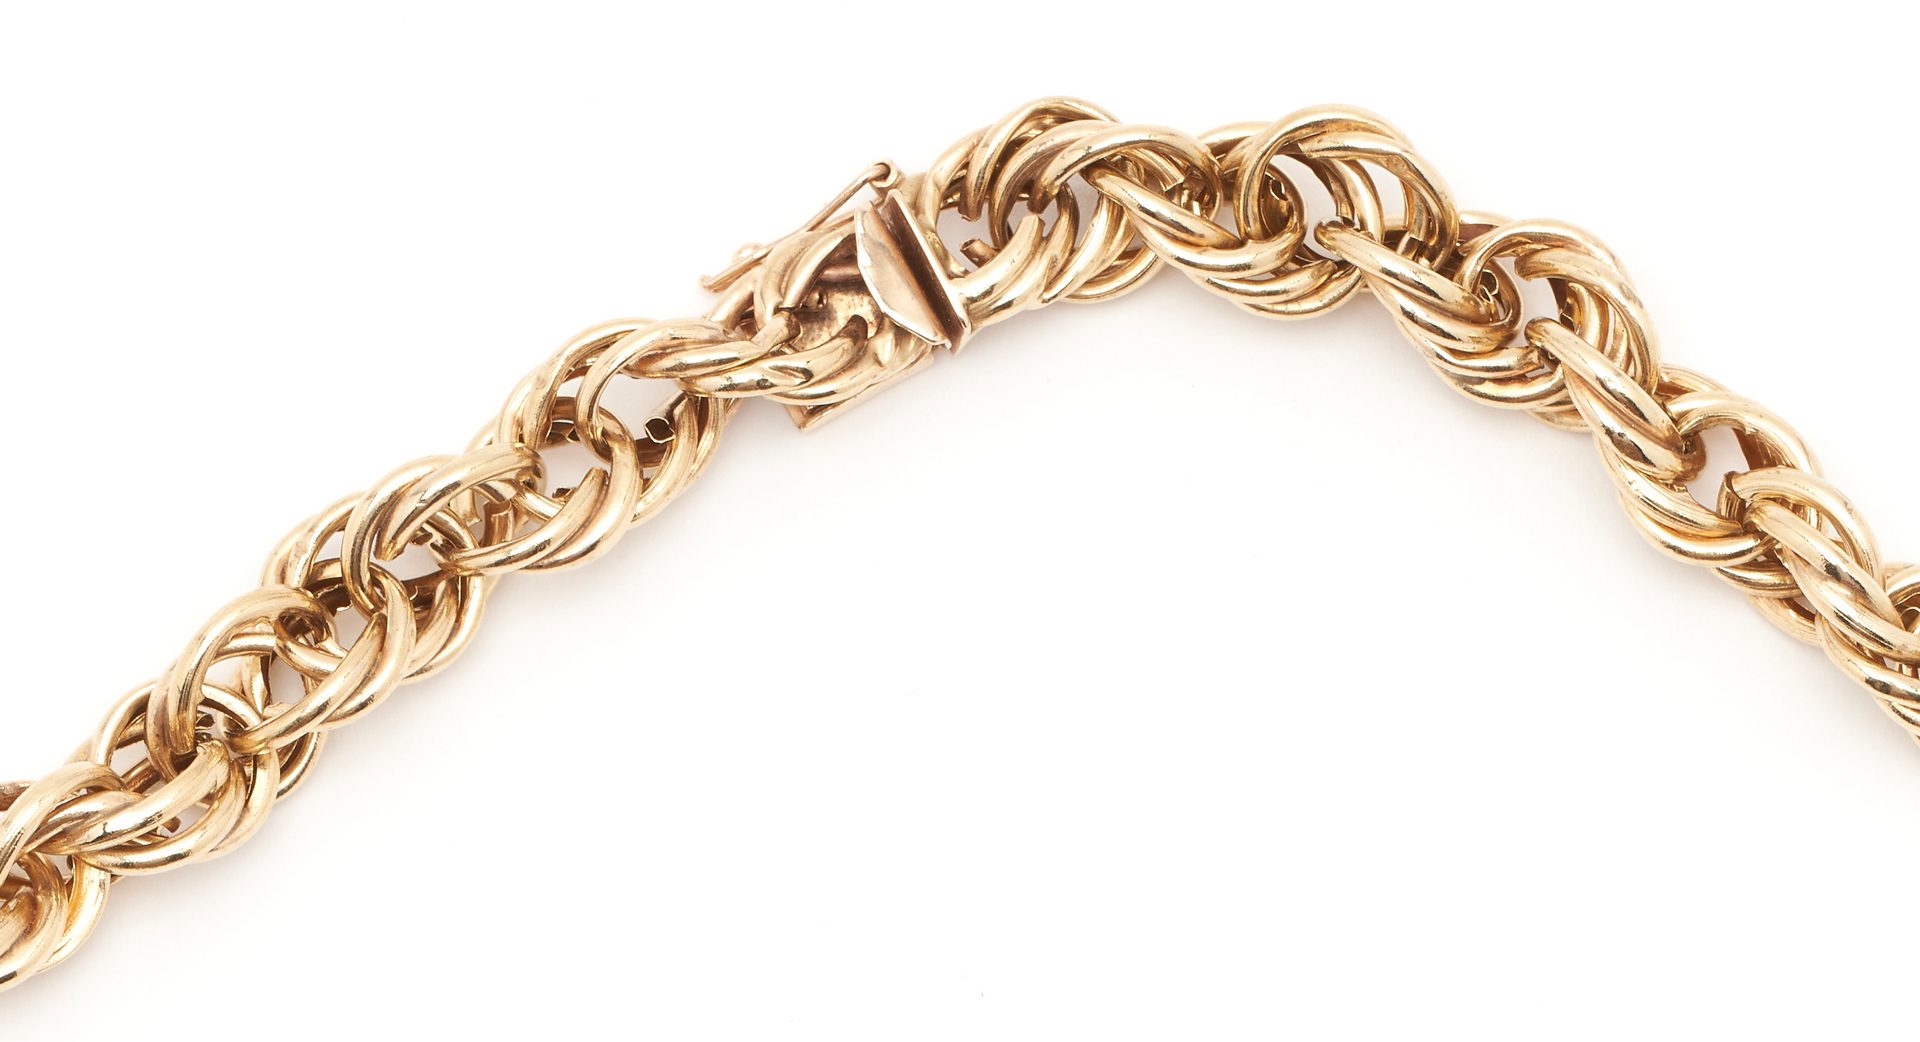 Lot 679: 14K Gold Rope Chain